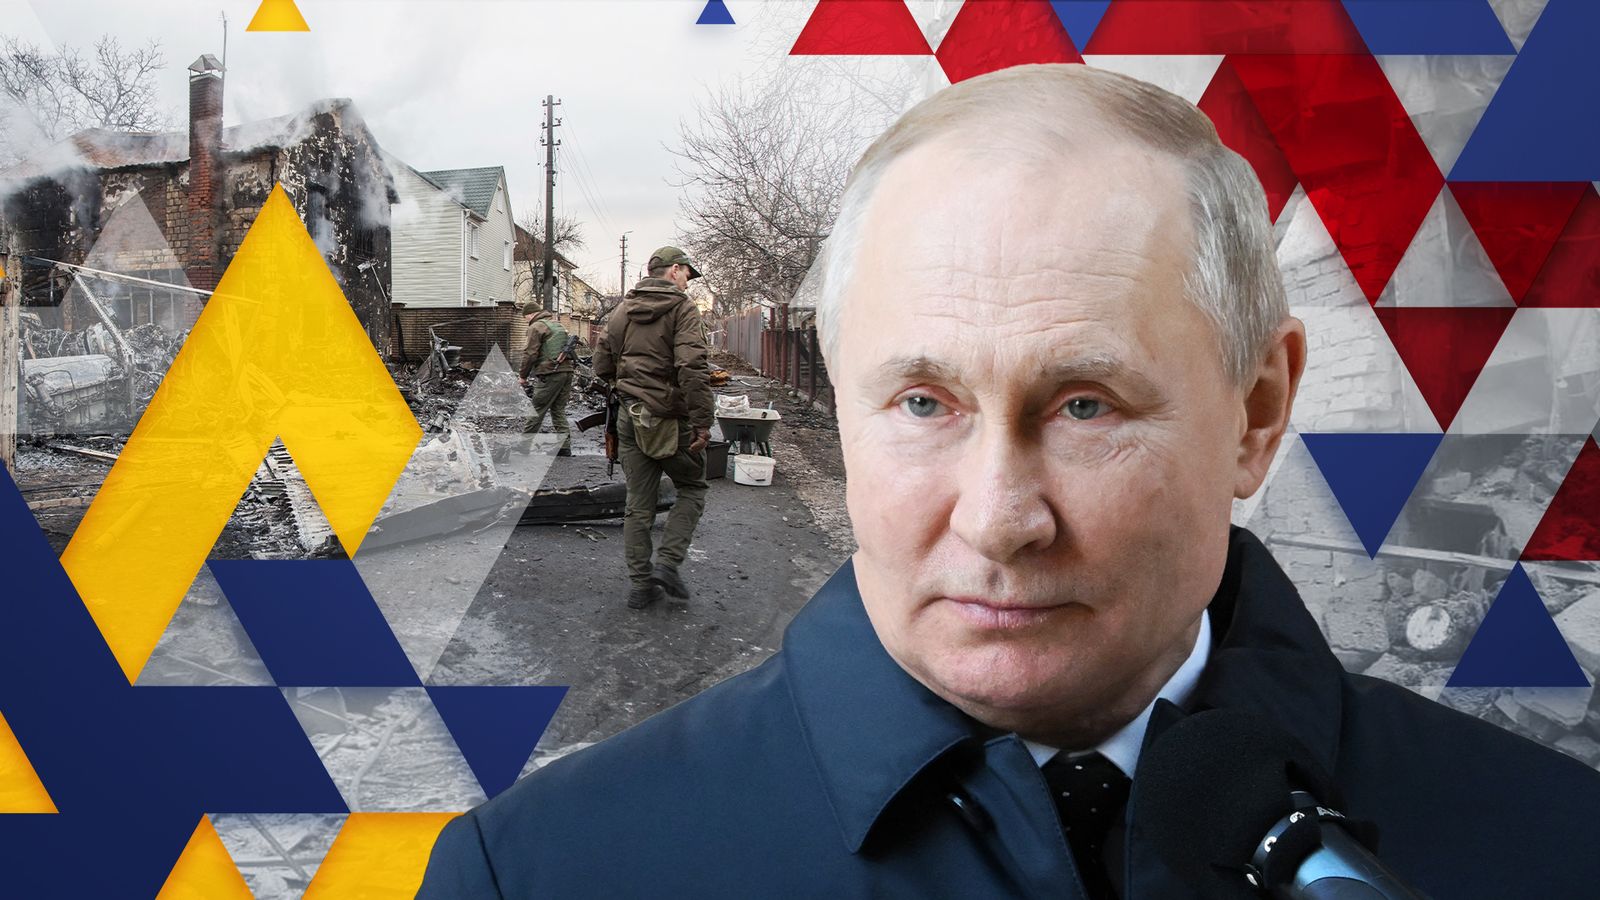 ukraine-war-putin-pursuing-anaconda-plan-with-force-what-are-his-options-for-ending-the-conflict